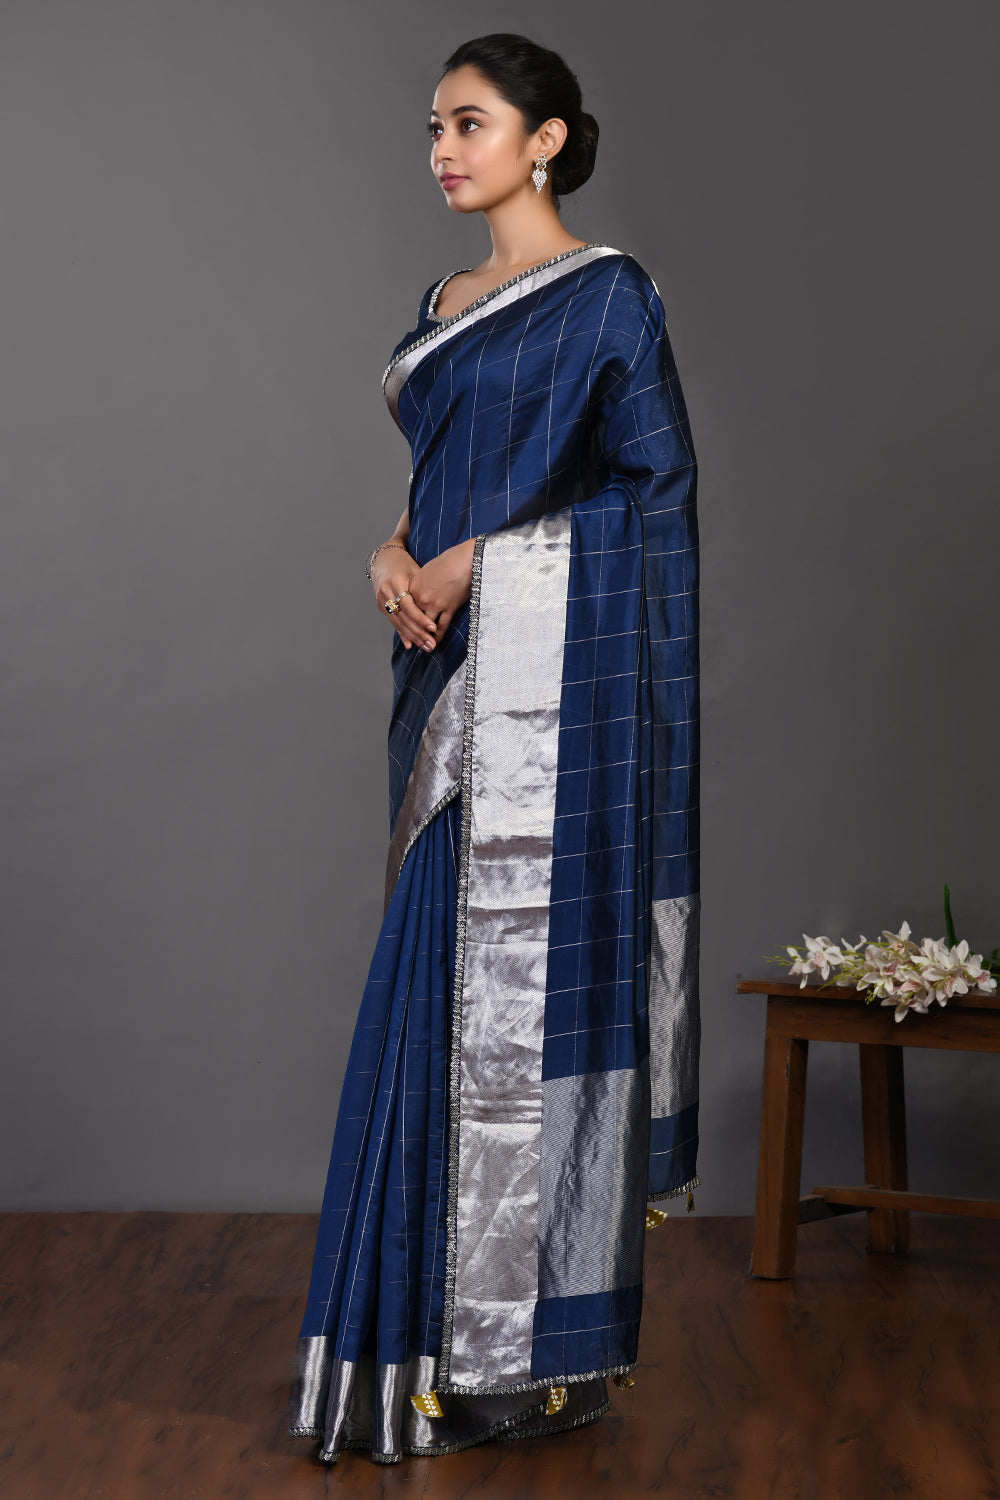 Buy beautiful navy blue handloom sari online in USA with silver zari border. Make a fashion statement on festive occasions and weddings with designer sarees, designer suits, Indian dresses, Anarkali suits, palazzo suits, designer gowns, sharara suits, embroidered sarees from Pure Elegance Indian fashion store in USA.-pallu